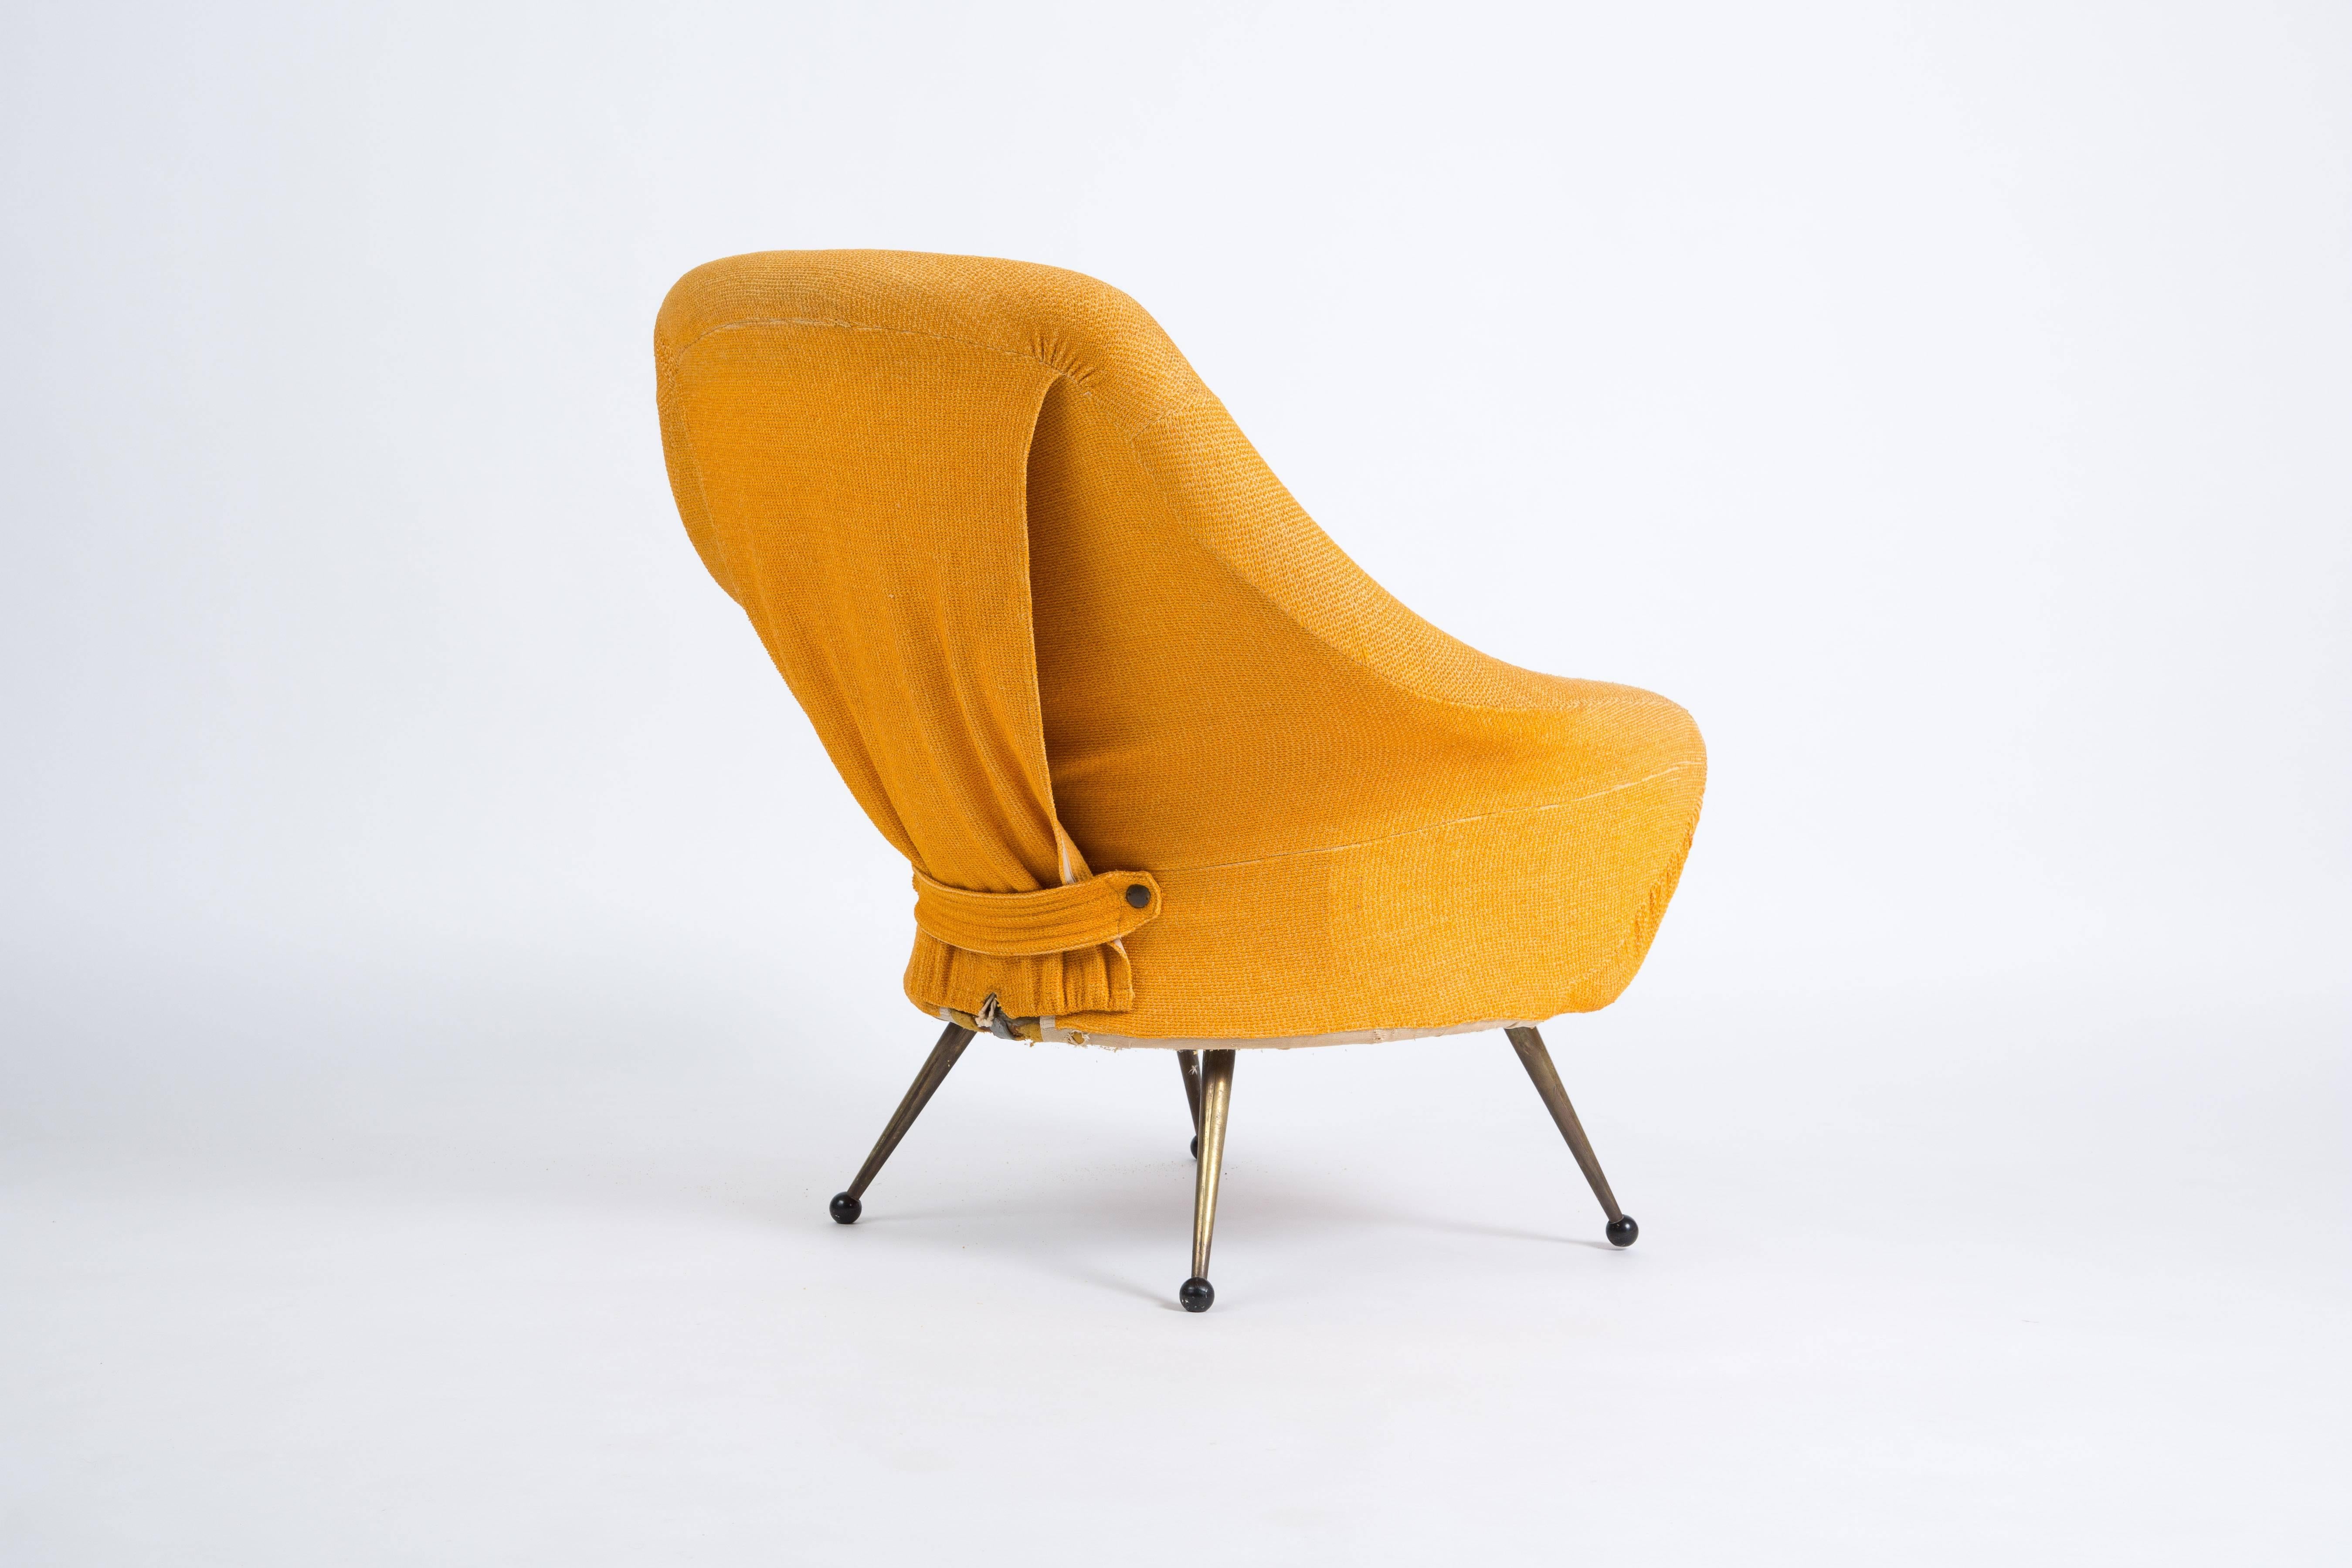 The Martingala designed by Marco Zanuso in 1954. Latex foam upholstered seat shell with removable covers on tapering brass legs terminating on ball feet.

The chair is in normal condition, but need to be reupholstered. So you can choose your own